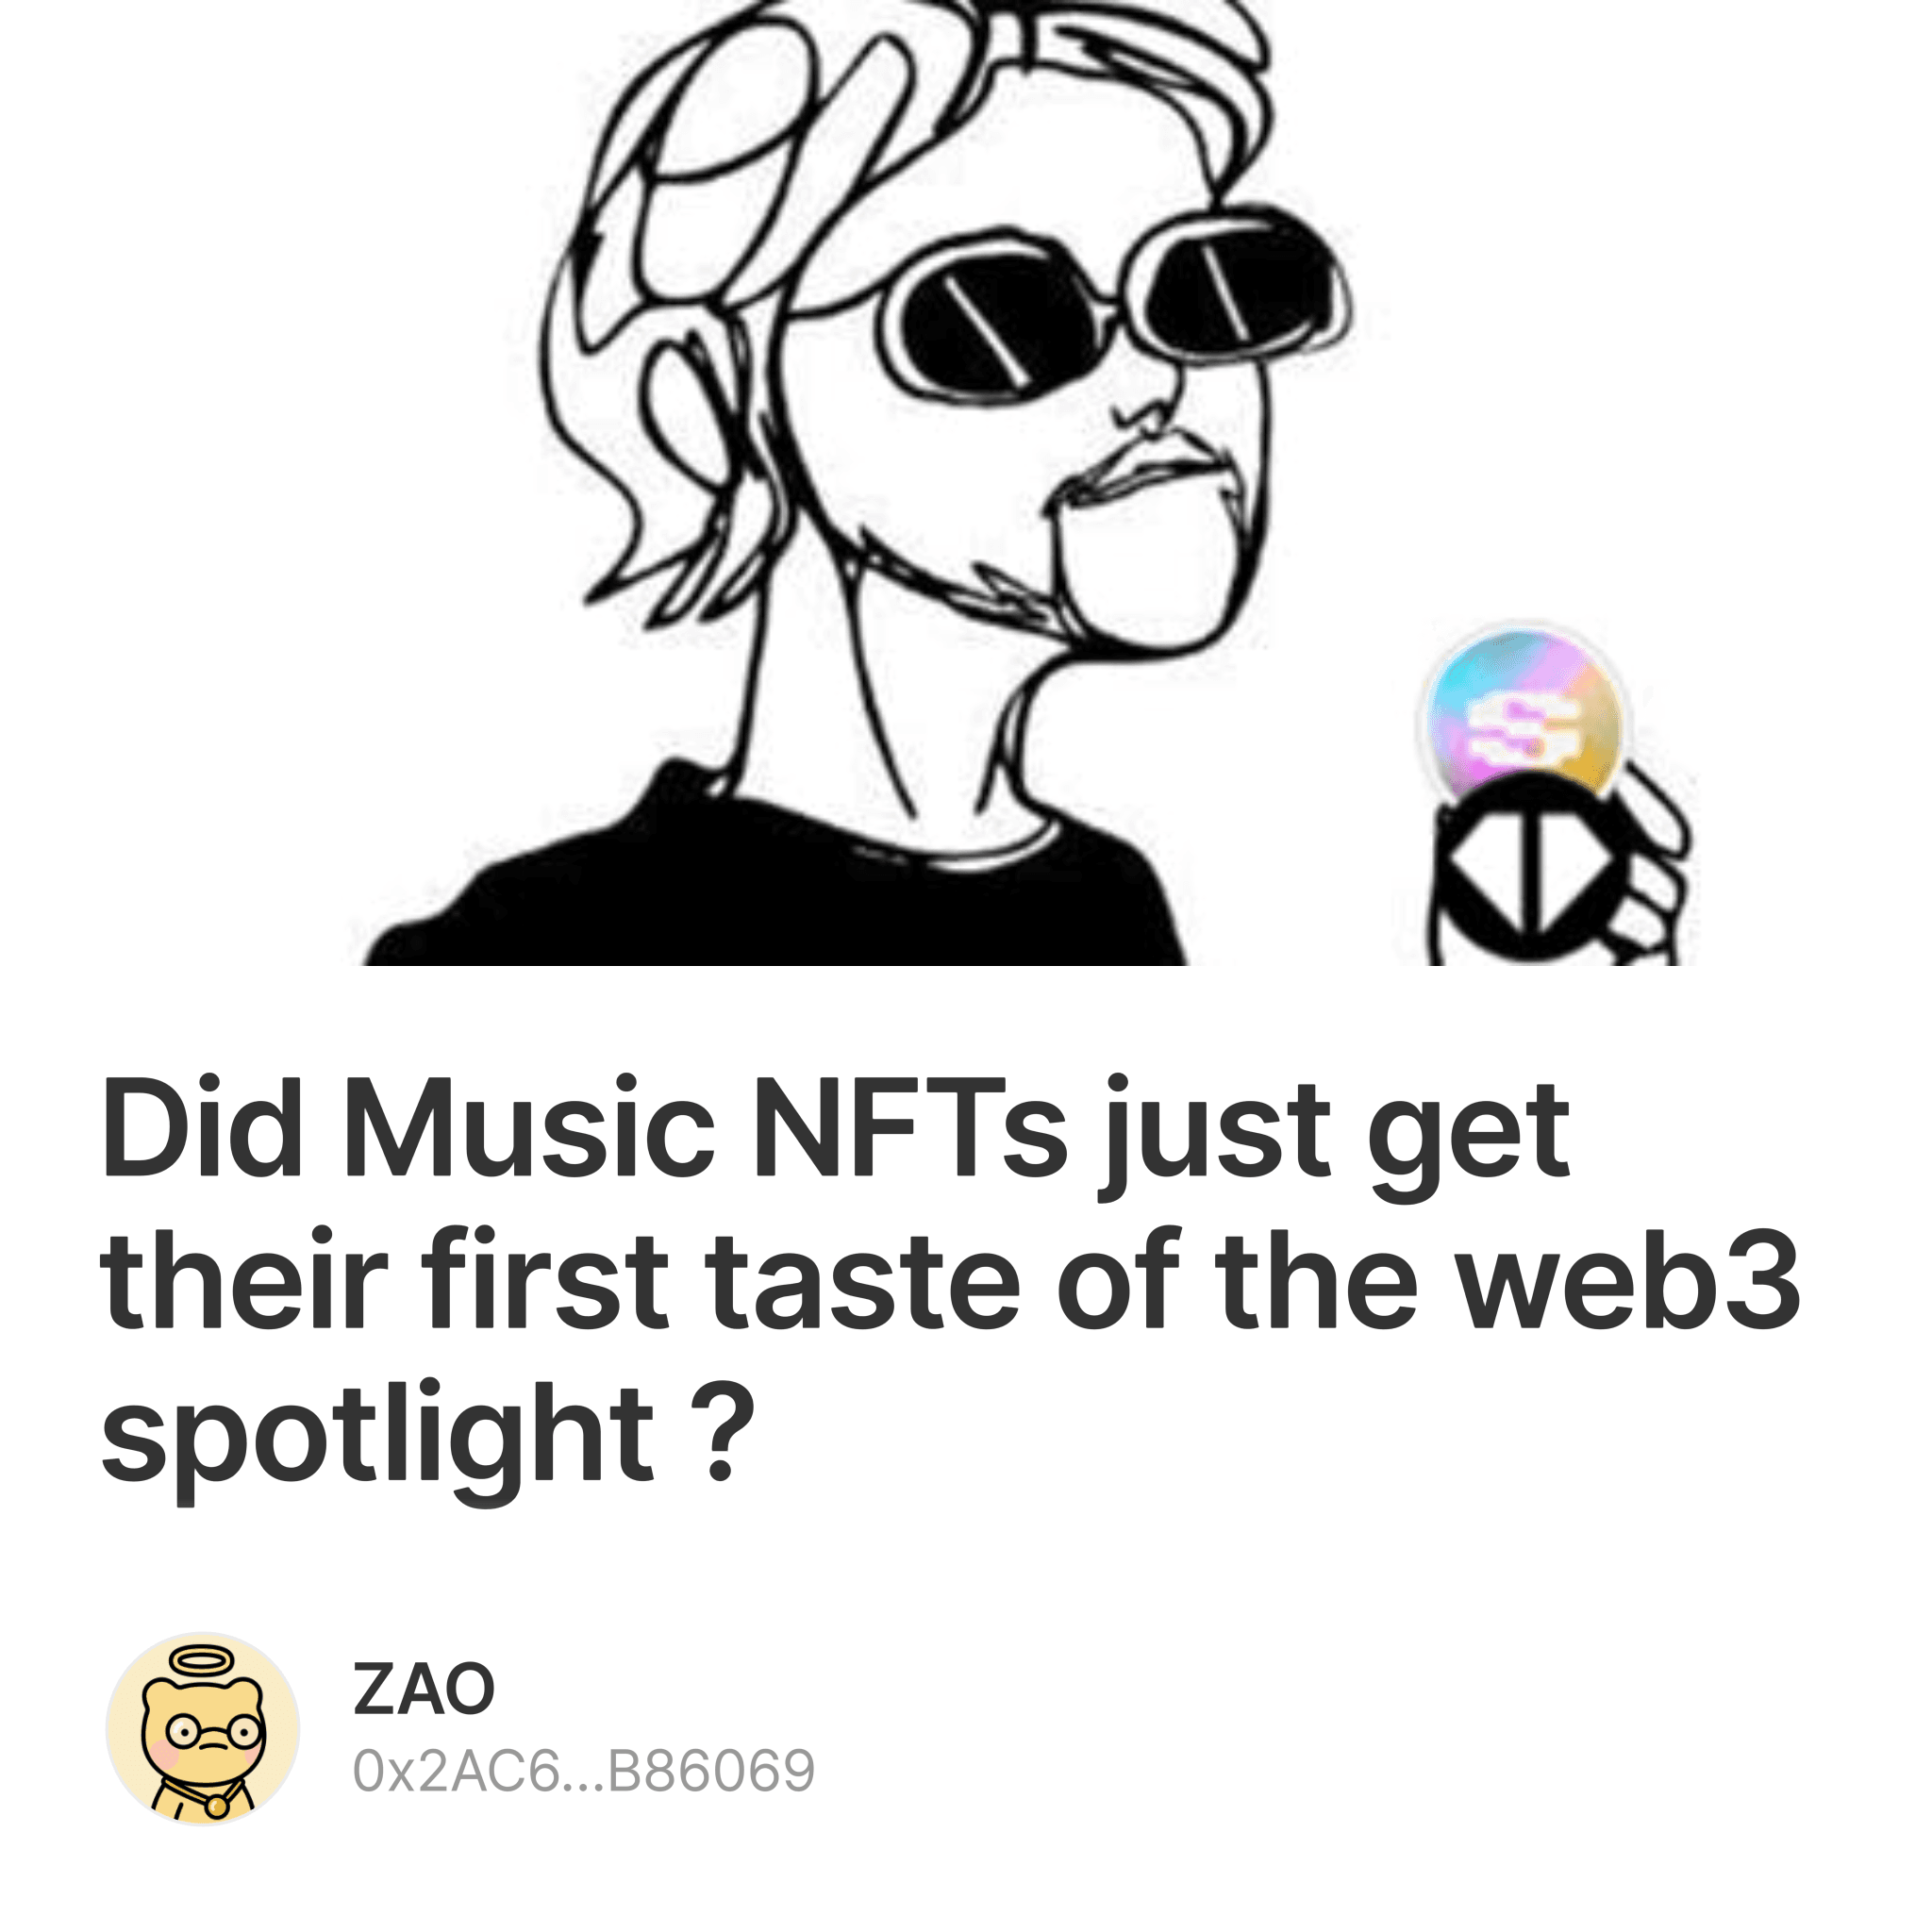 Did Music NFTs 🎧 just get their first taste of the web3 spotlight 💡? 3/100